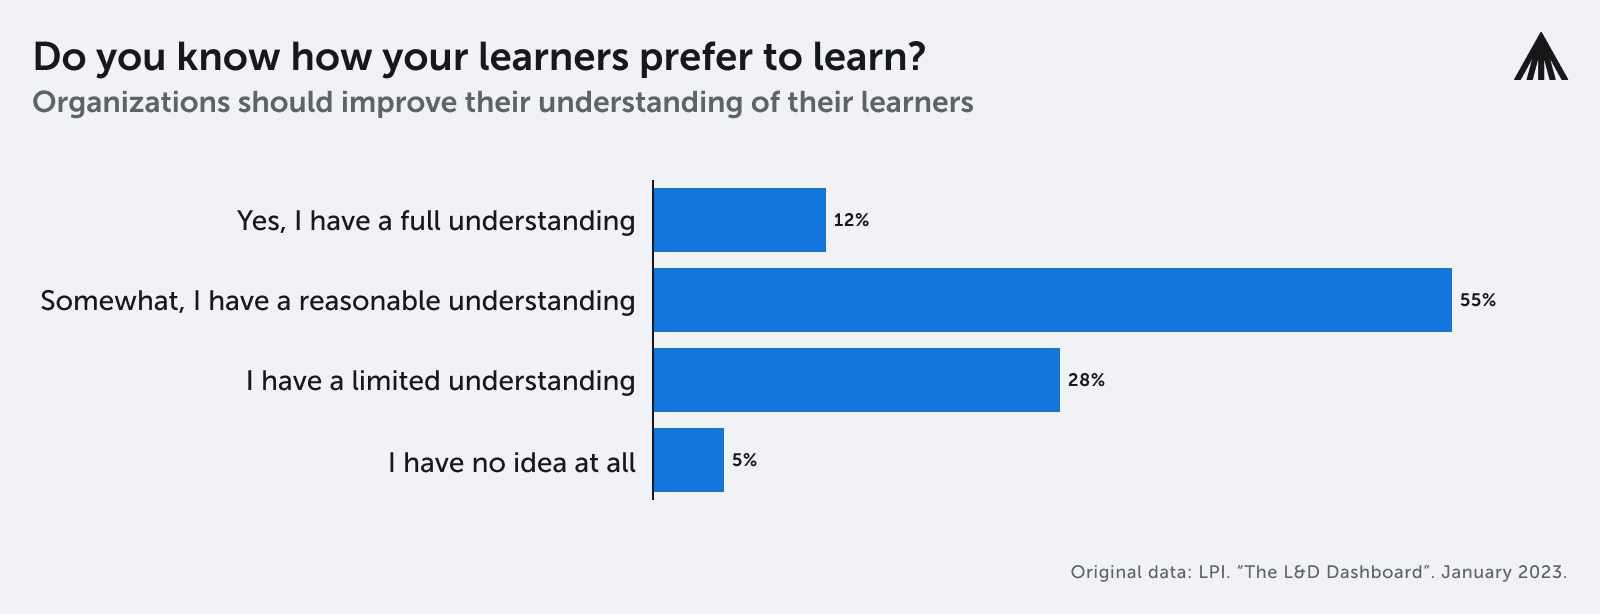 The poll with the results on Do you know how your learners prefer to learn